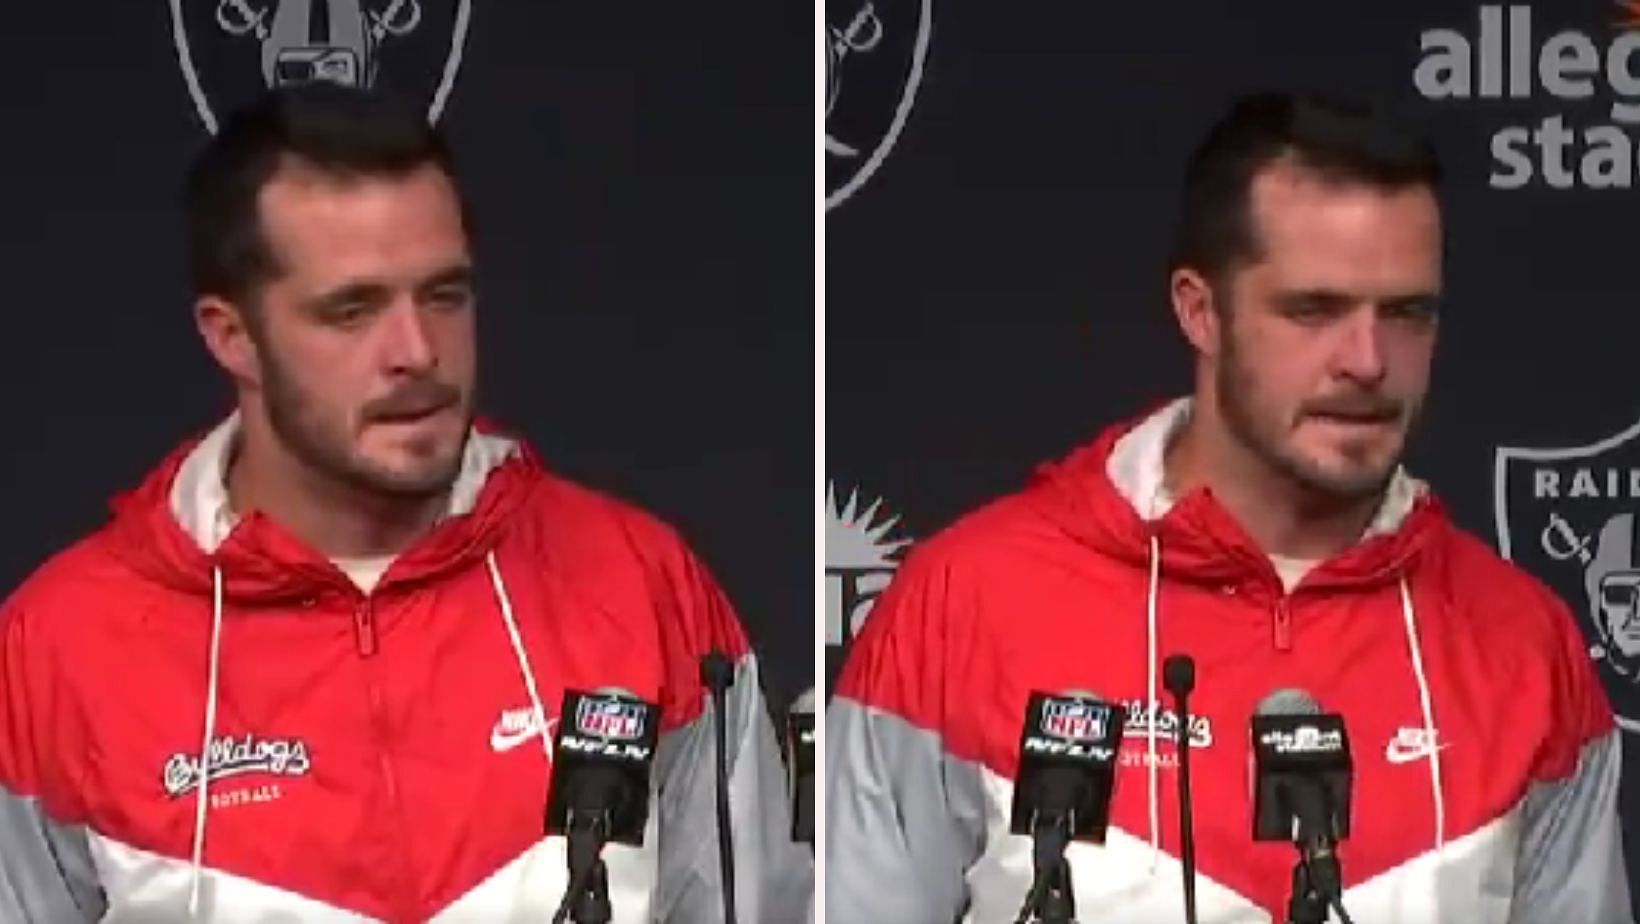 Derek Carr's emotions emerge after Raiders lose to Colts